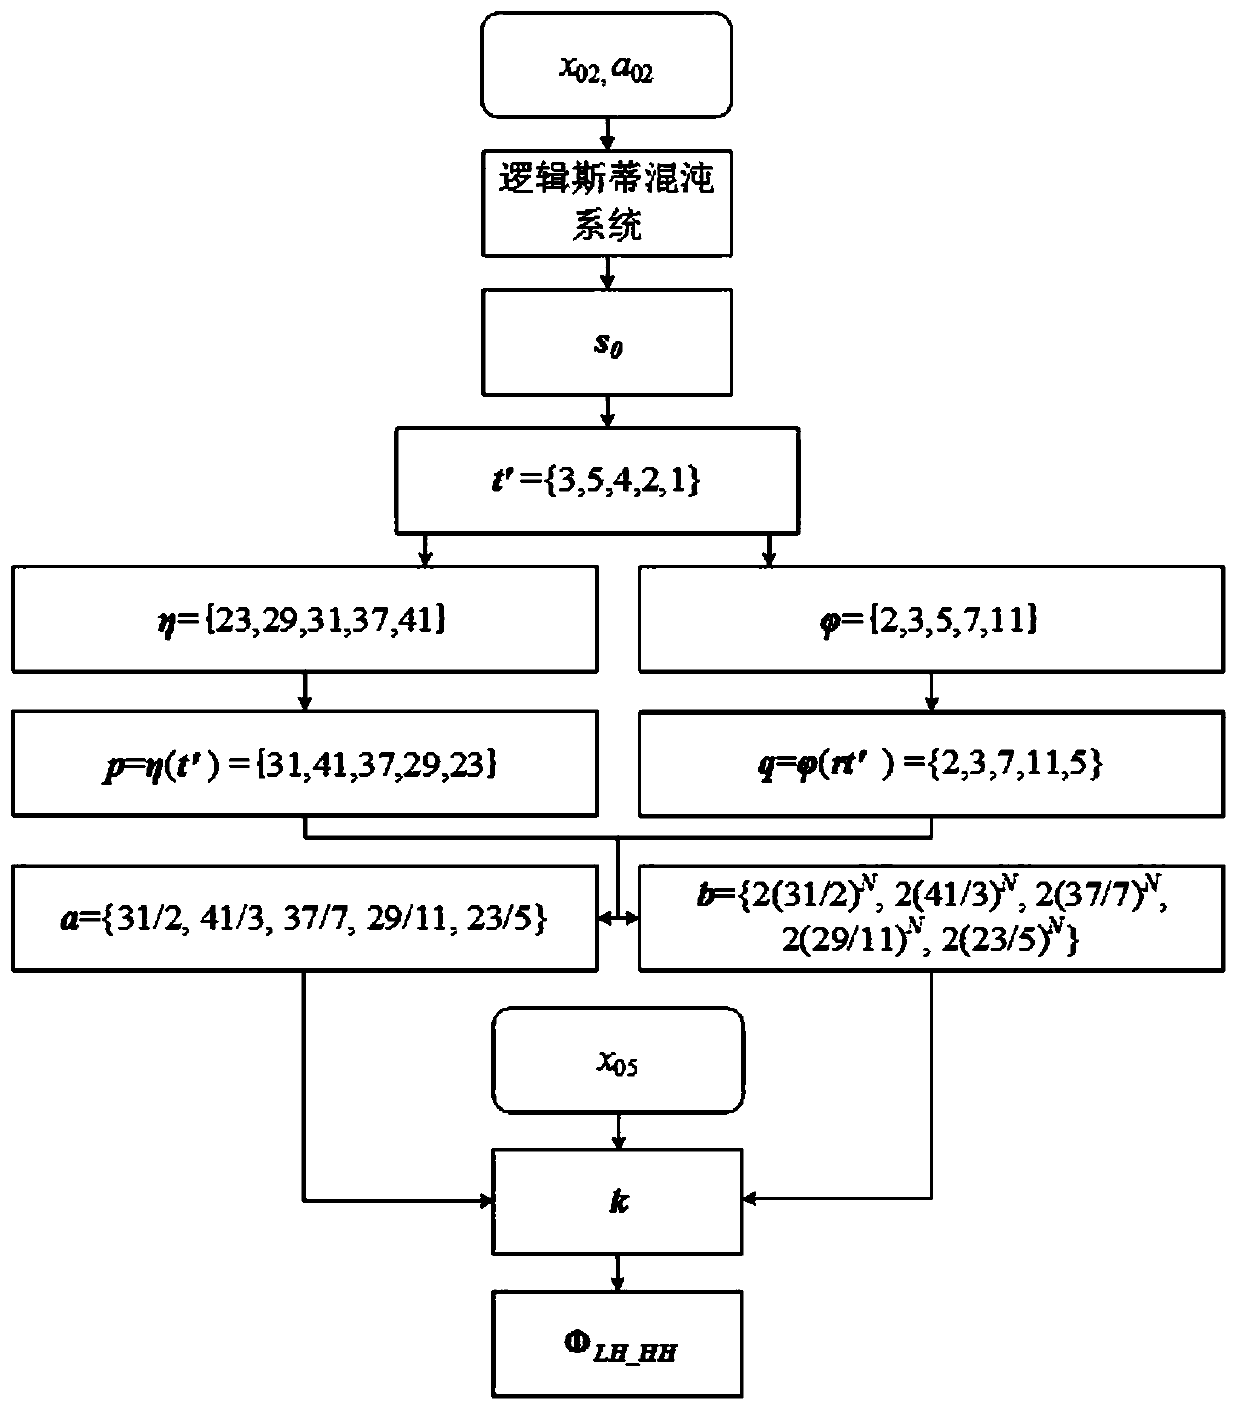 Image compressed encryption method based on compressed sensing and Chua's circuit